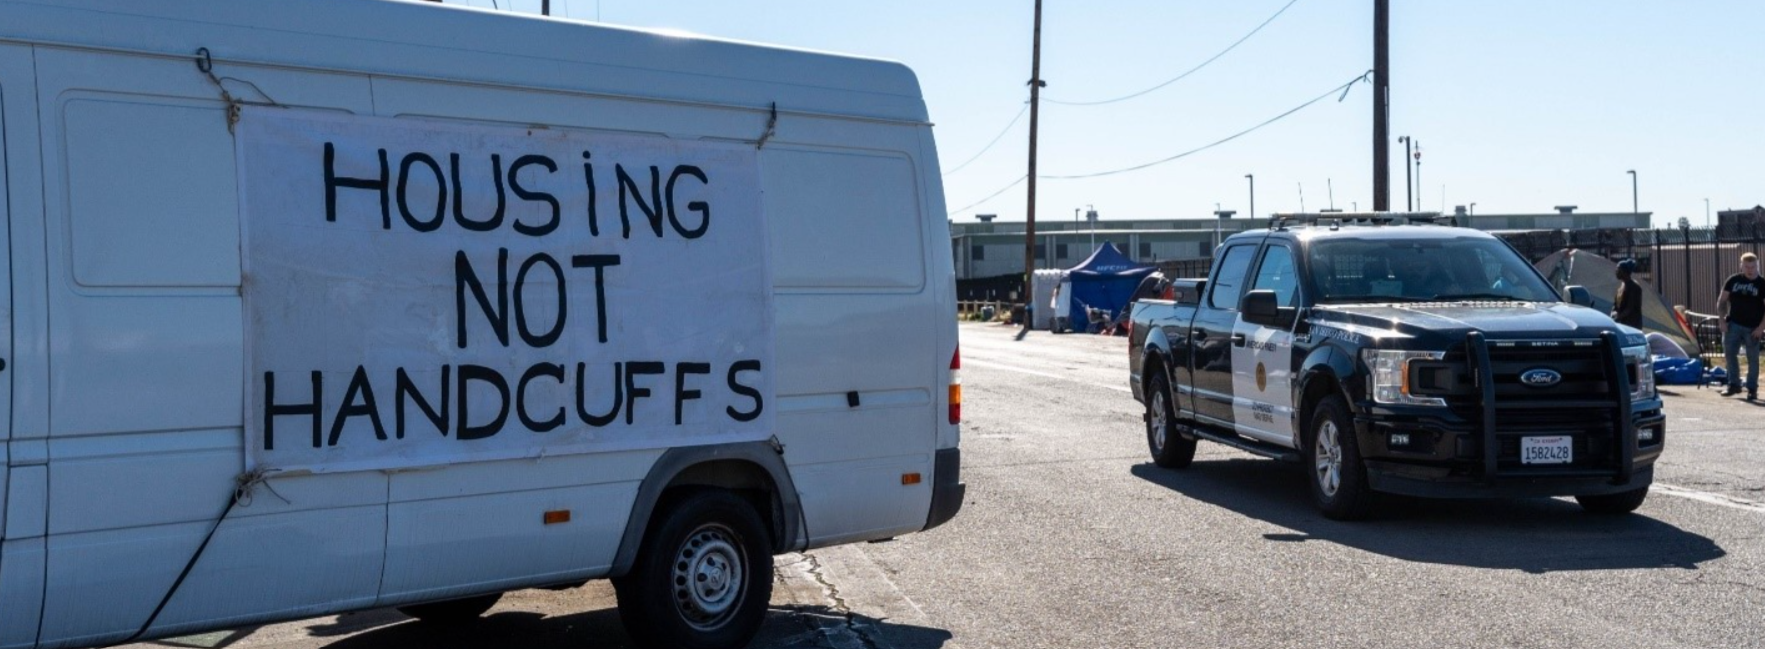 Photo of a van with a banner reading Housing Not Handcuffs, Police vehicle in background